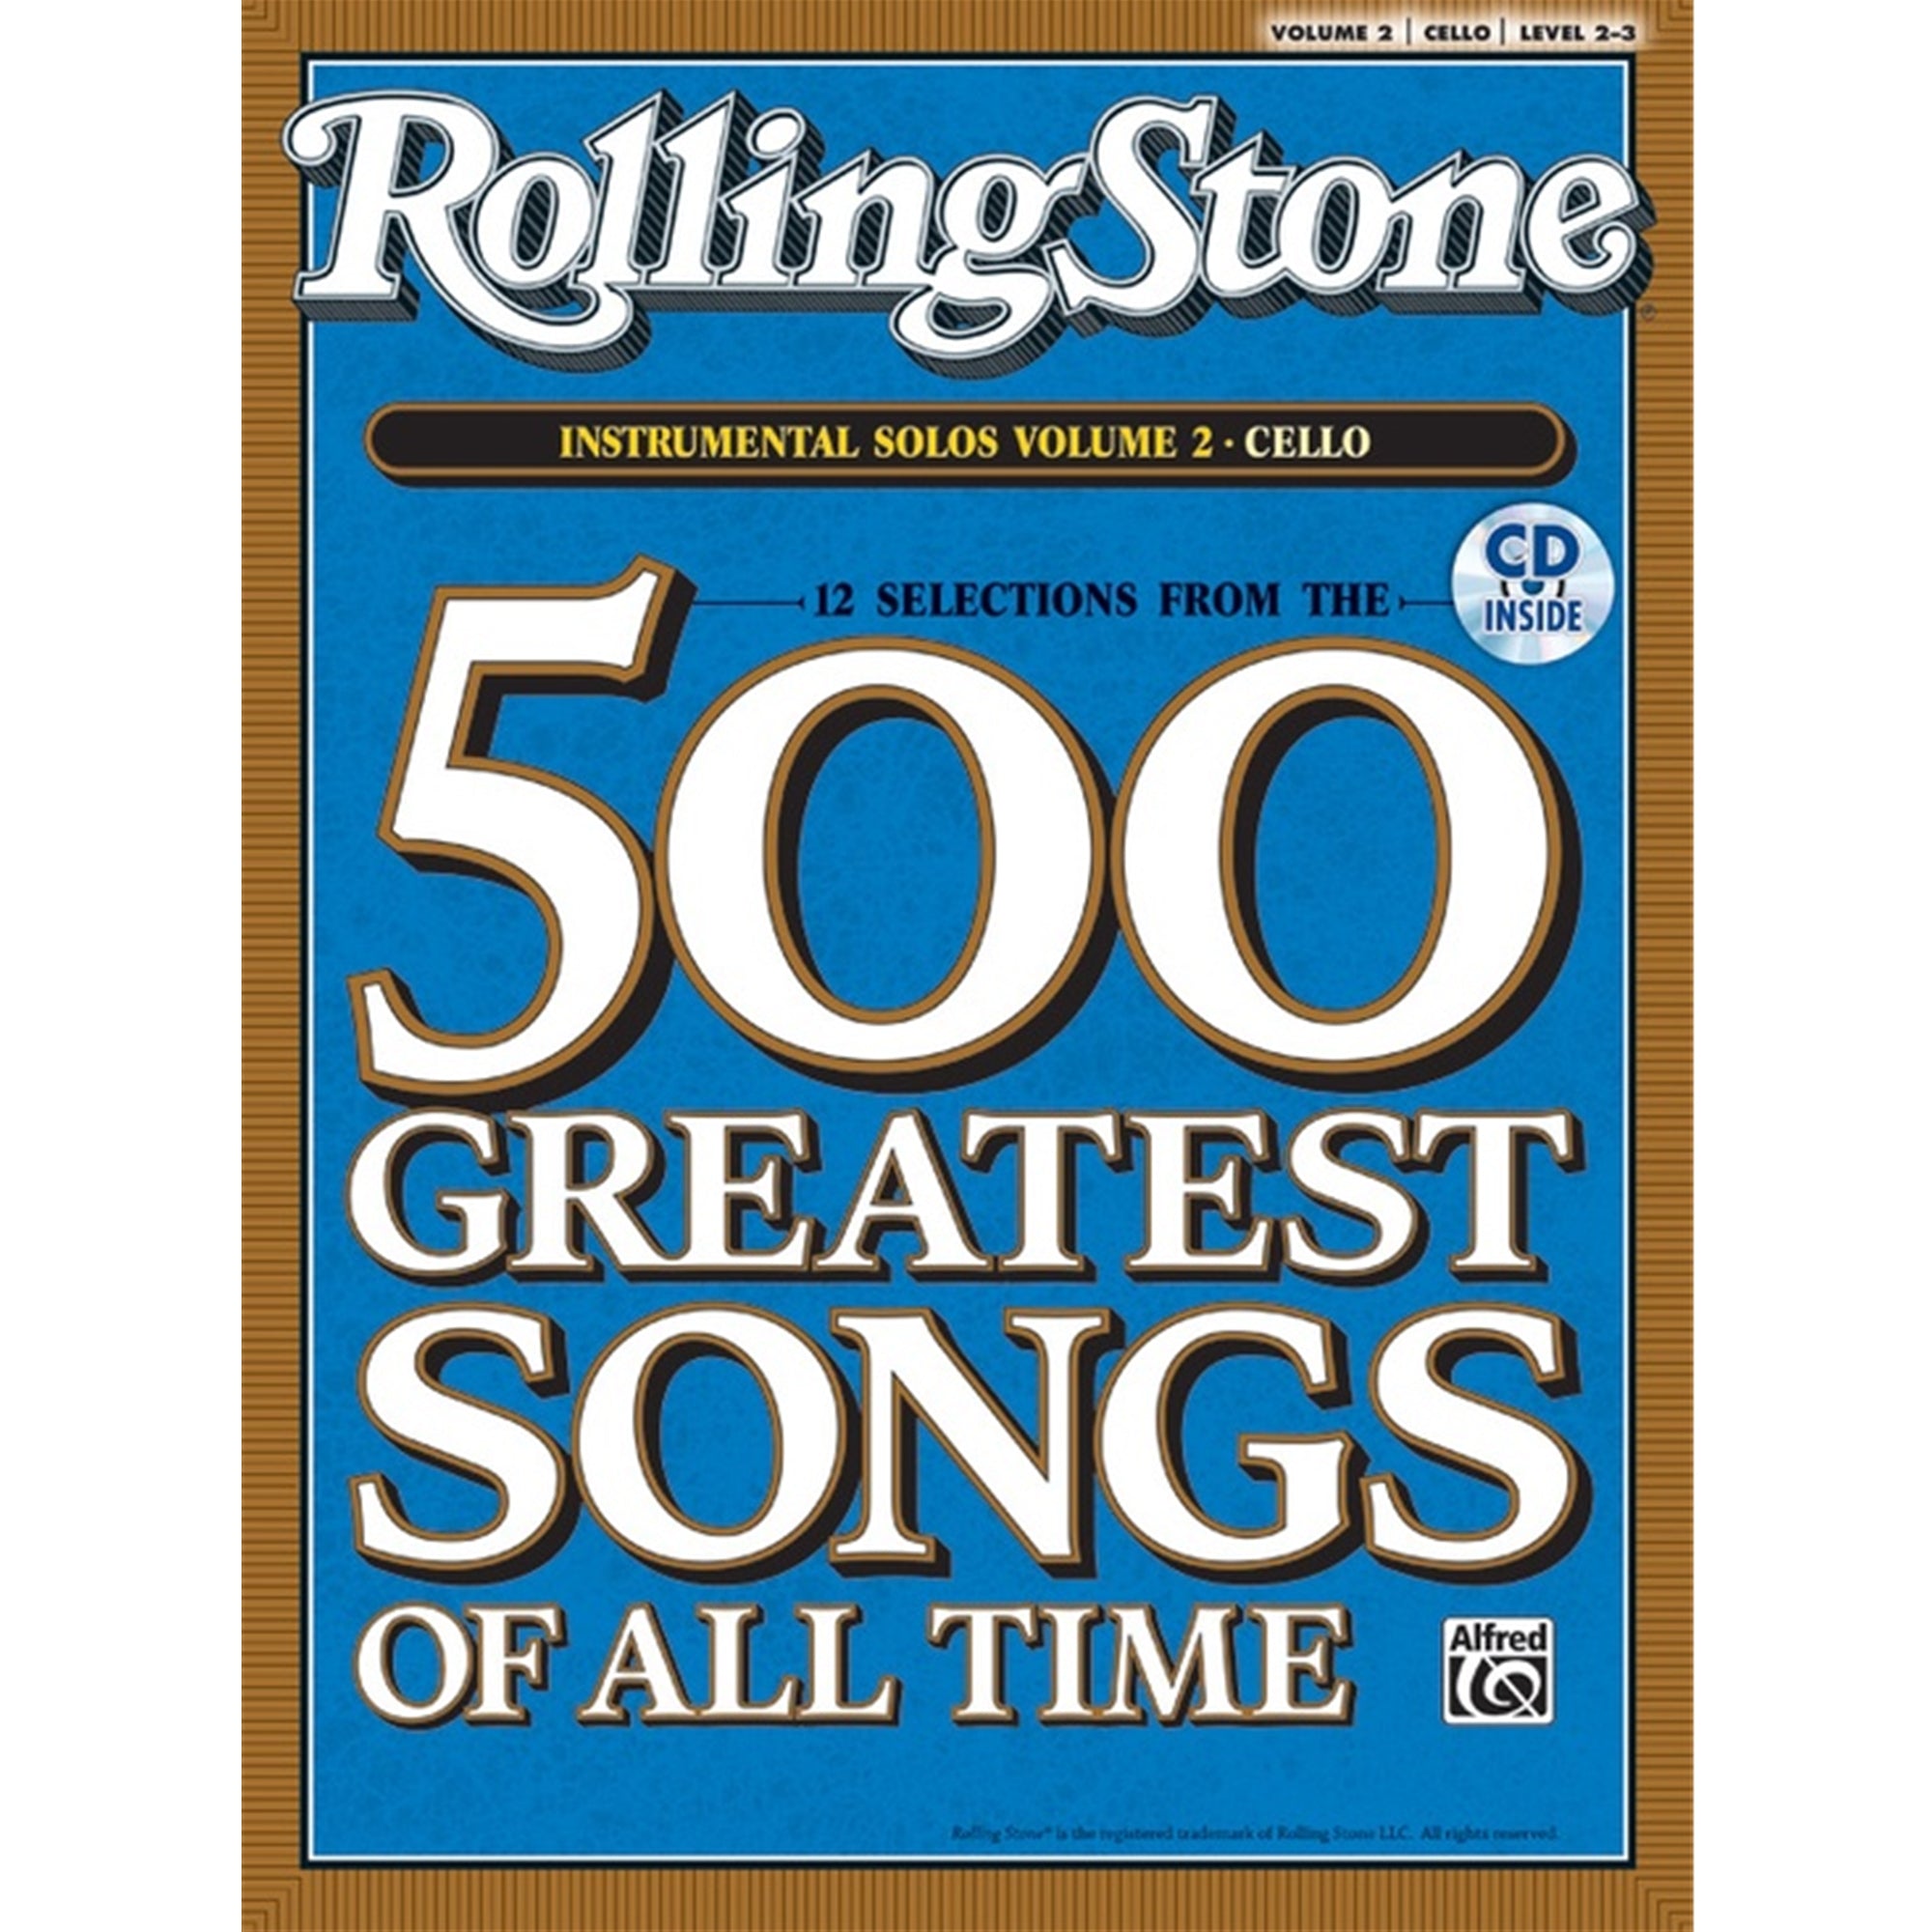 ALFRED 30872 Rolling Stone's 500 Greatest Songs of All Time: Instrumental Solos for Cello Volume 2